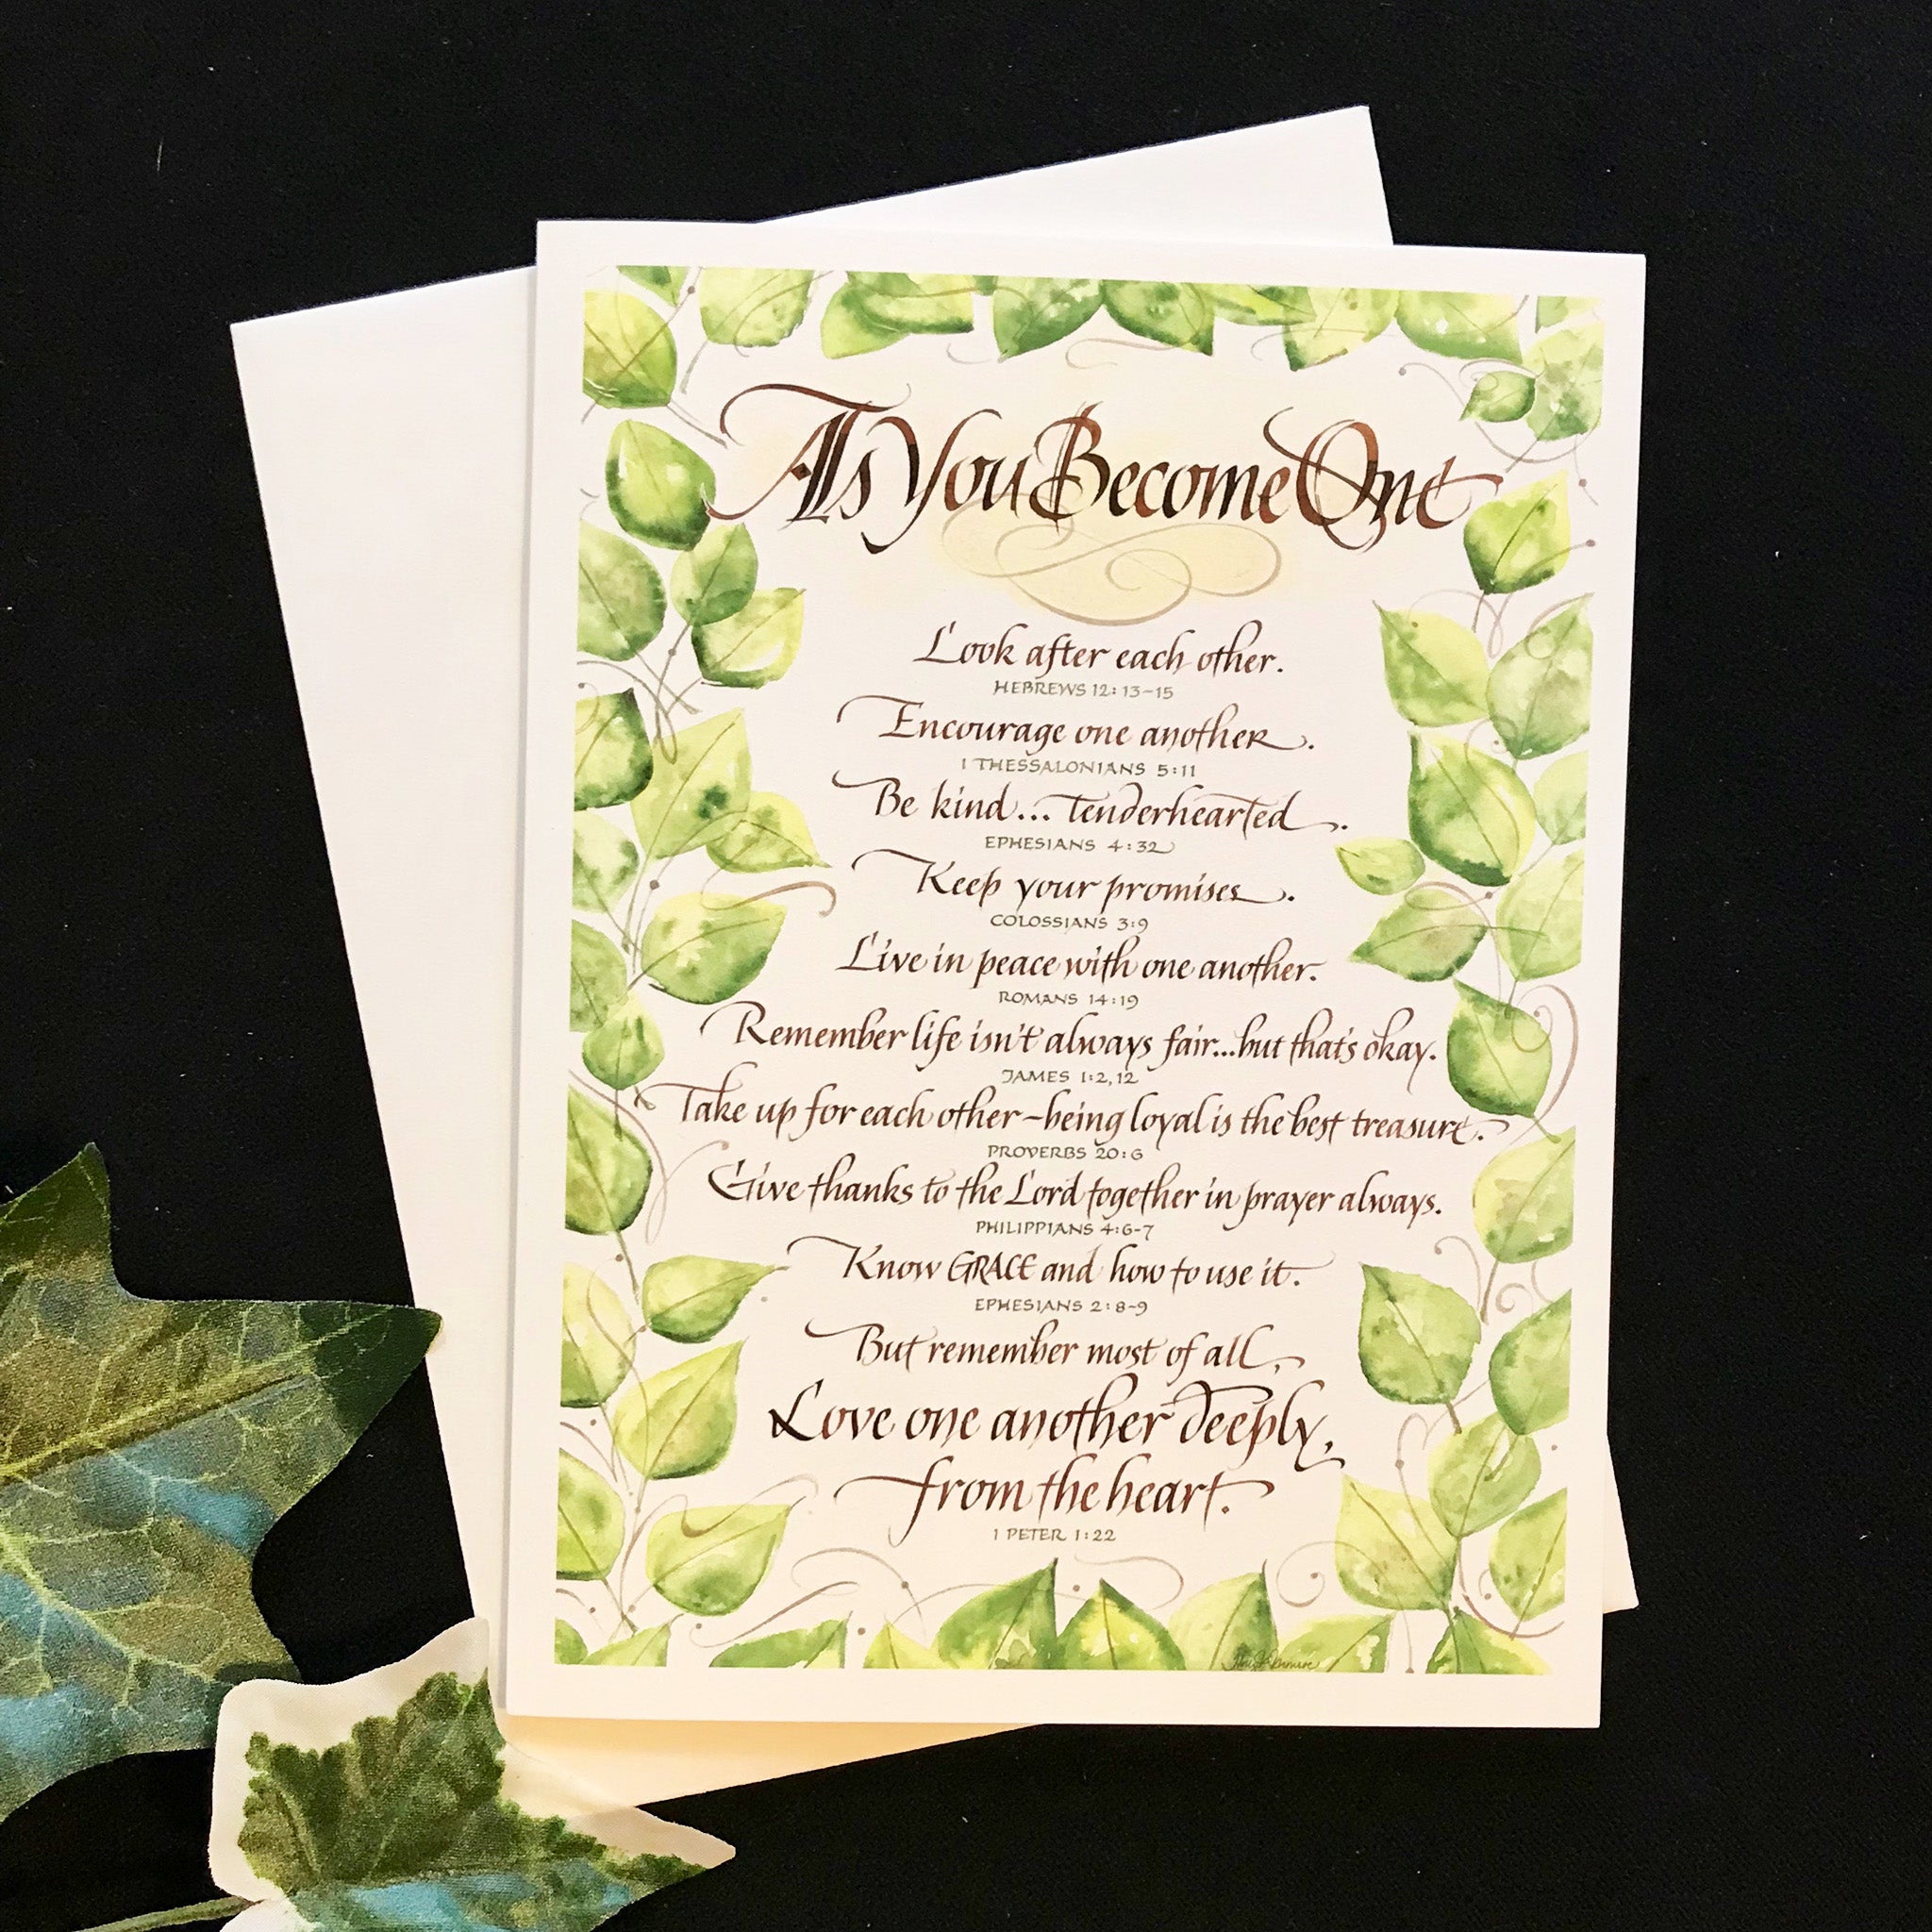 Fine Art Calligraphy Card As You Become One by Holly Monroe Calligraphy